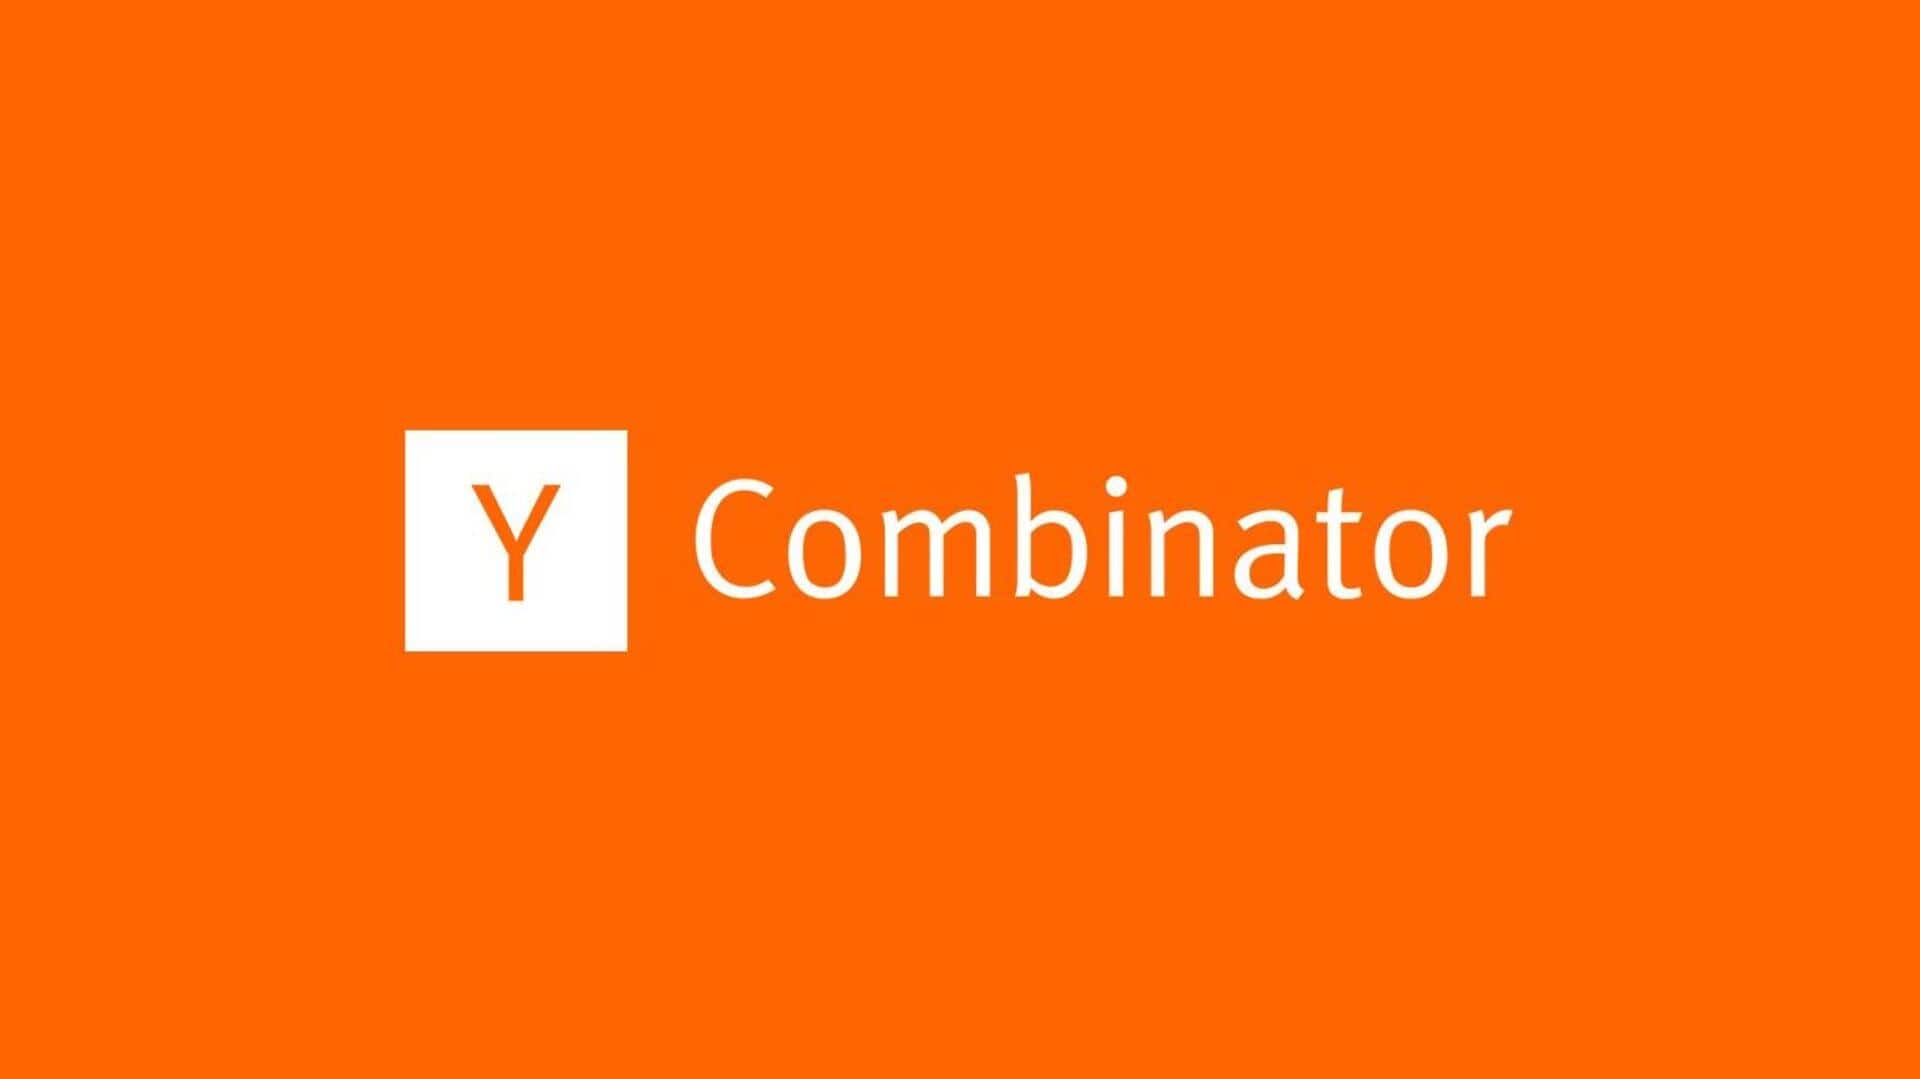 Y Combinator removes Indian start-up from S23 batch over irregularities